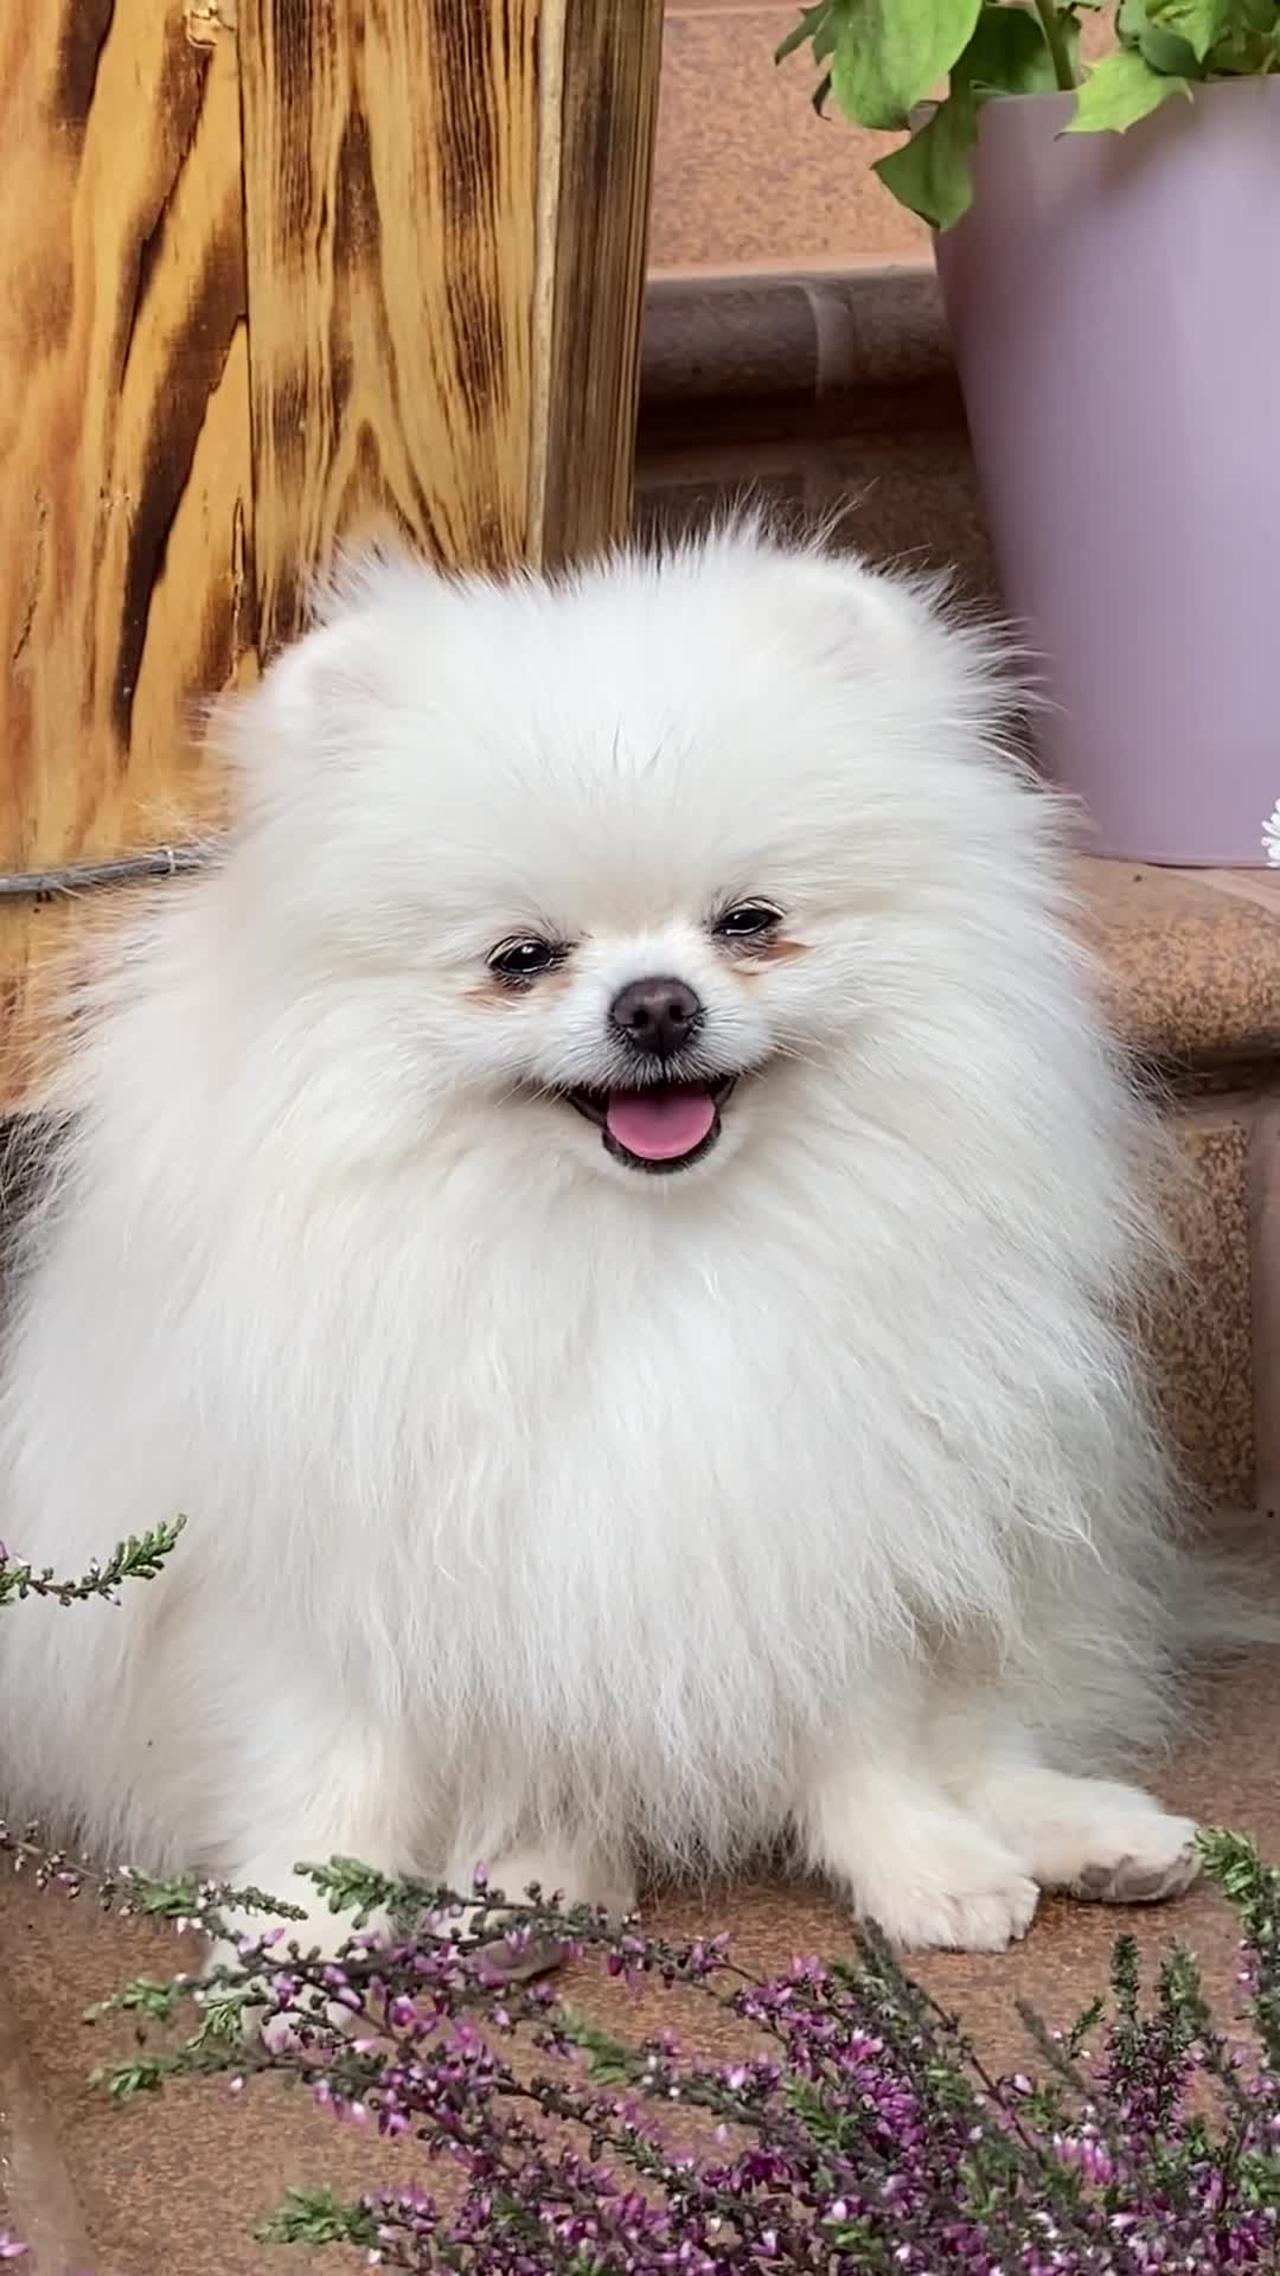 Just A Cute Little Fluffy White Dog